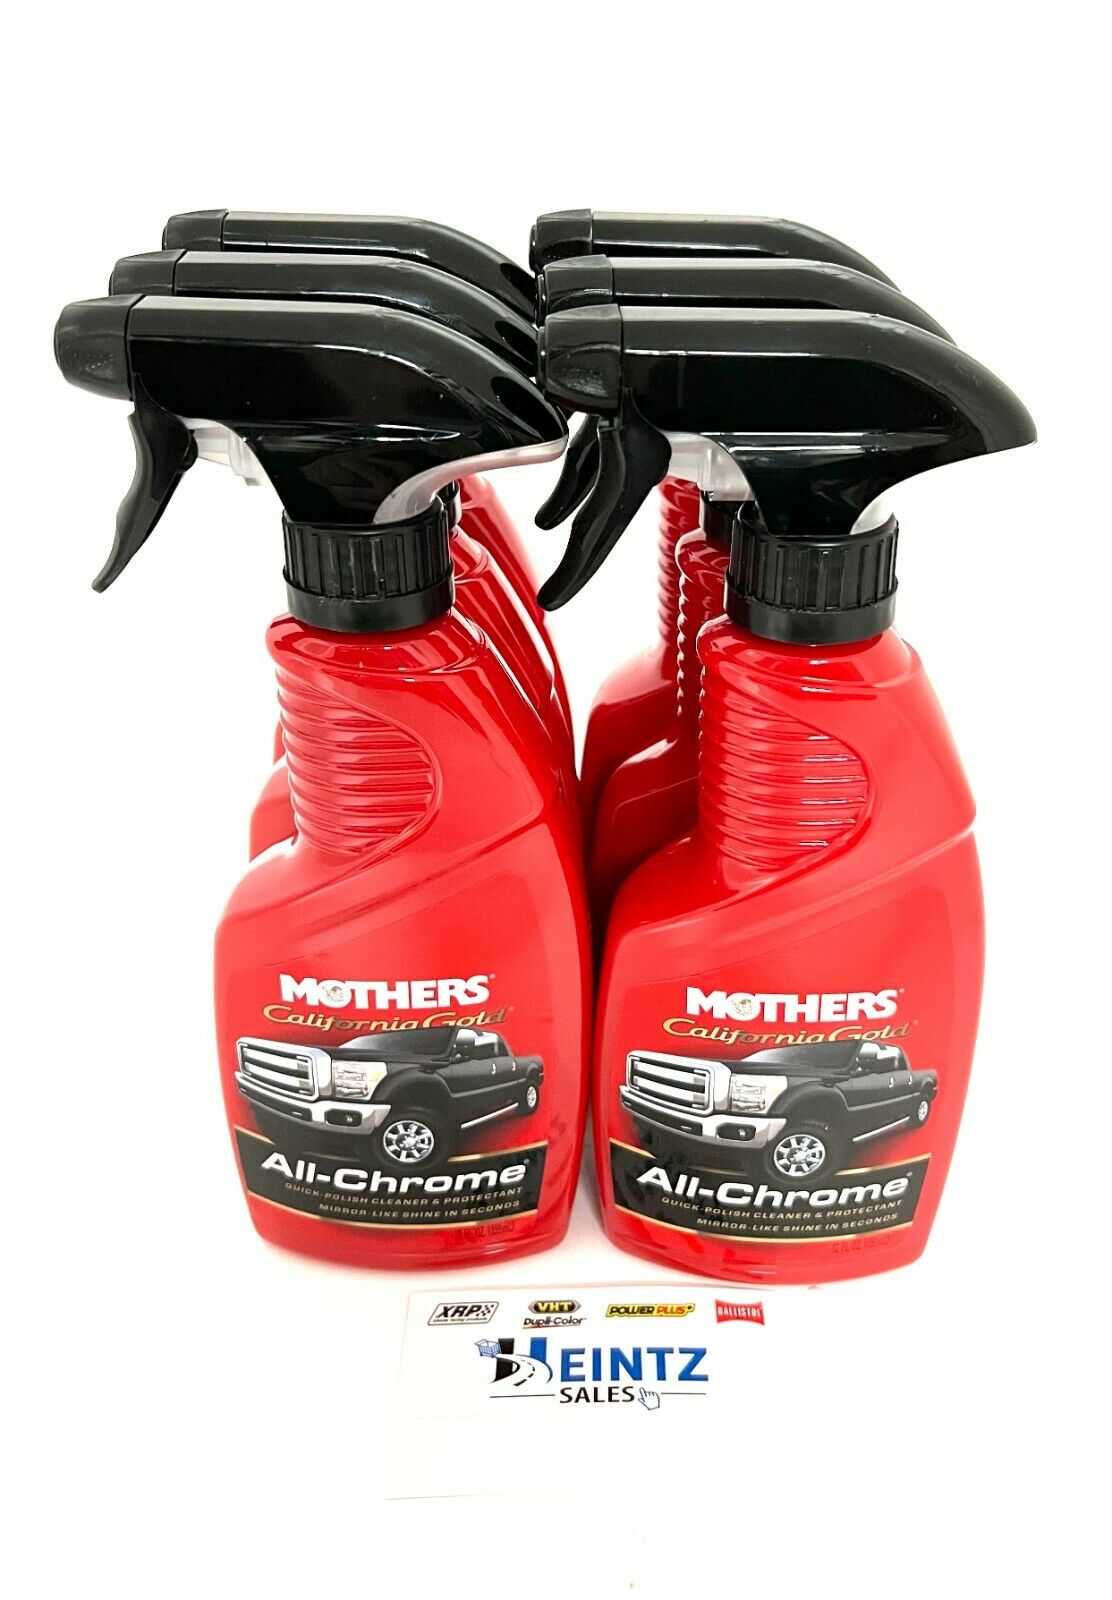 MOTHERS 05222 California Gold 6 PACK - All Chrome - Quick Polish Cleaner- 12 oz.